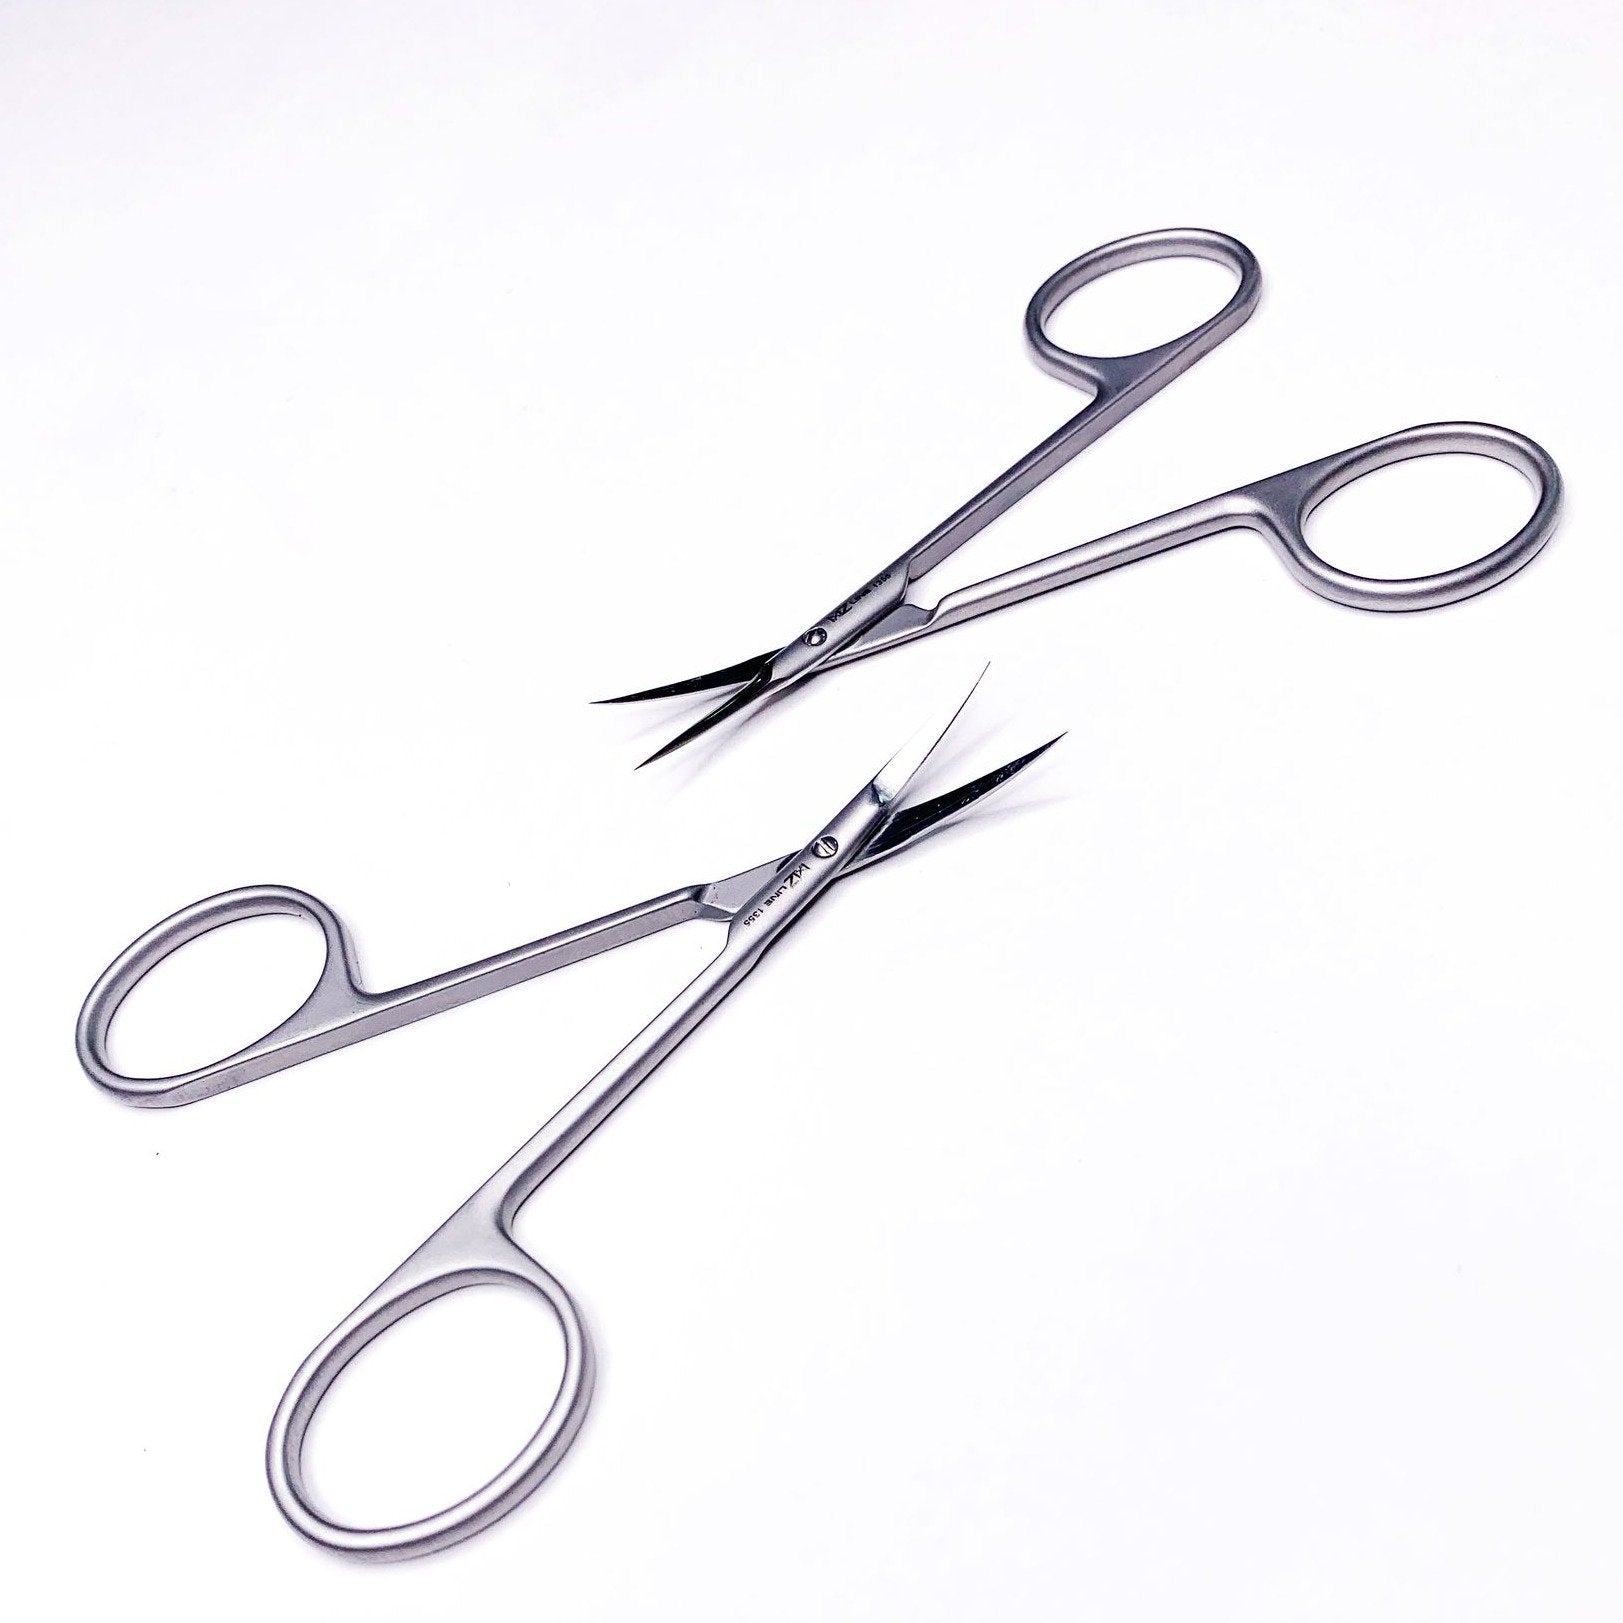  FOMIYES 1pc Leather Scissors Silicone Nail Tools